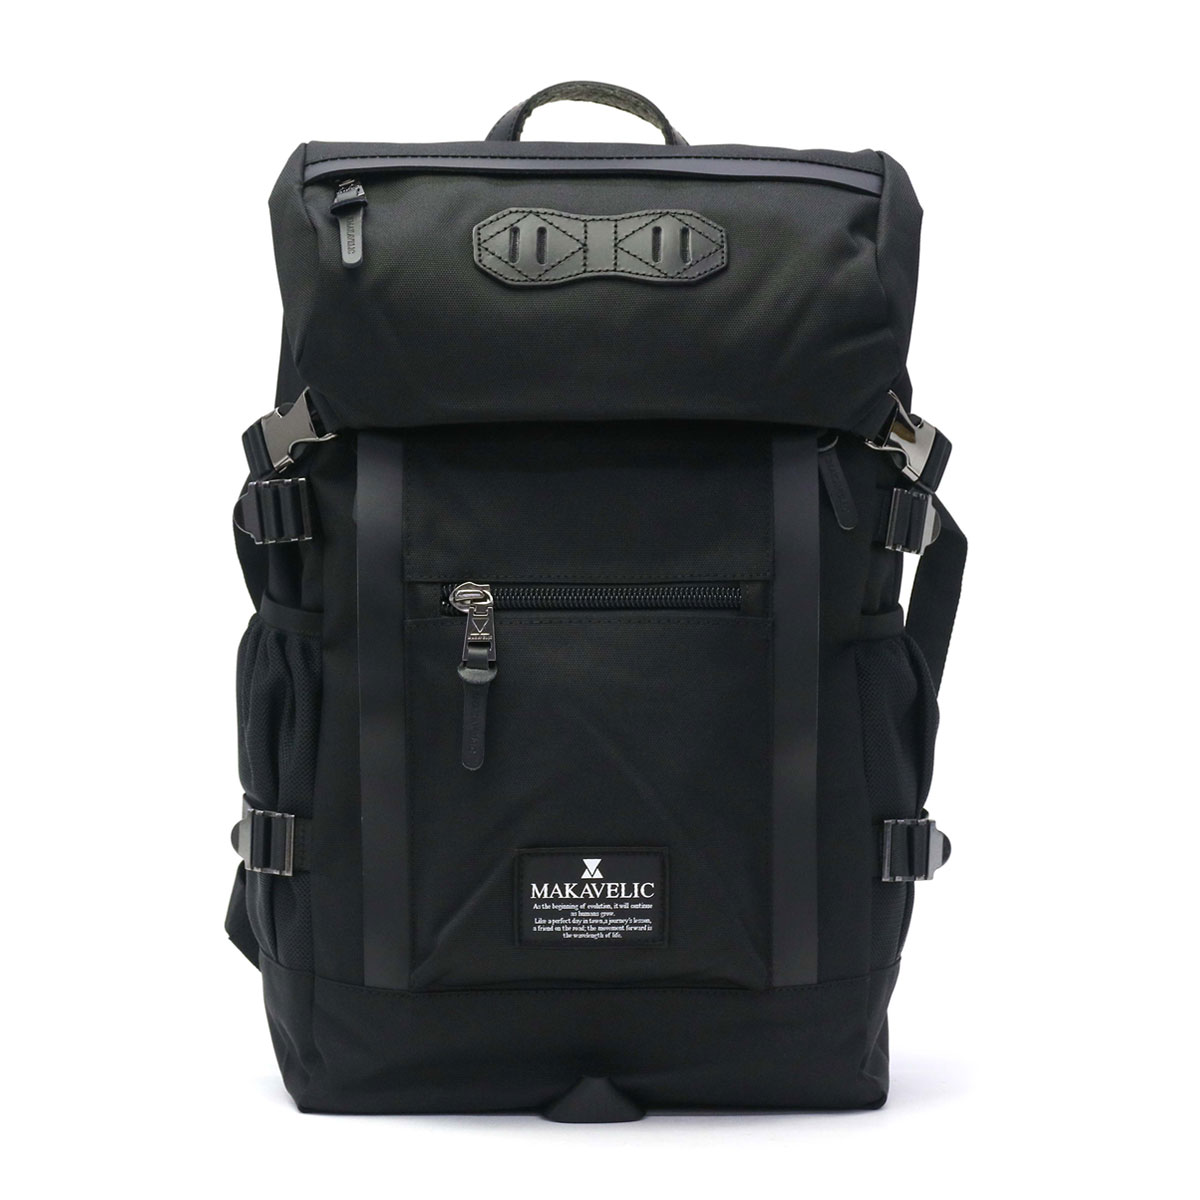 MAKAVELIC マキャベリック CHASE DOUBLE LINE BACKPACK 24L 3106-10107 ...